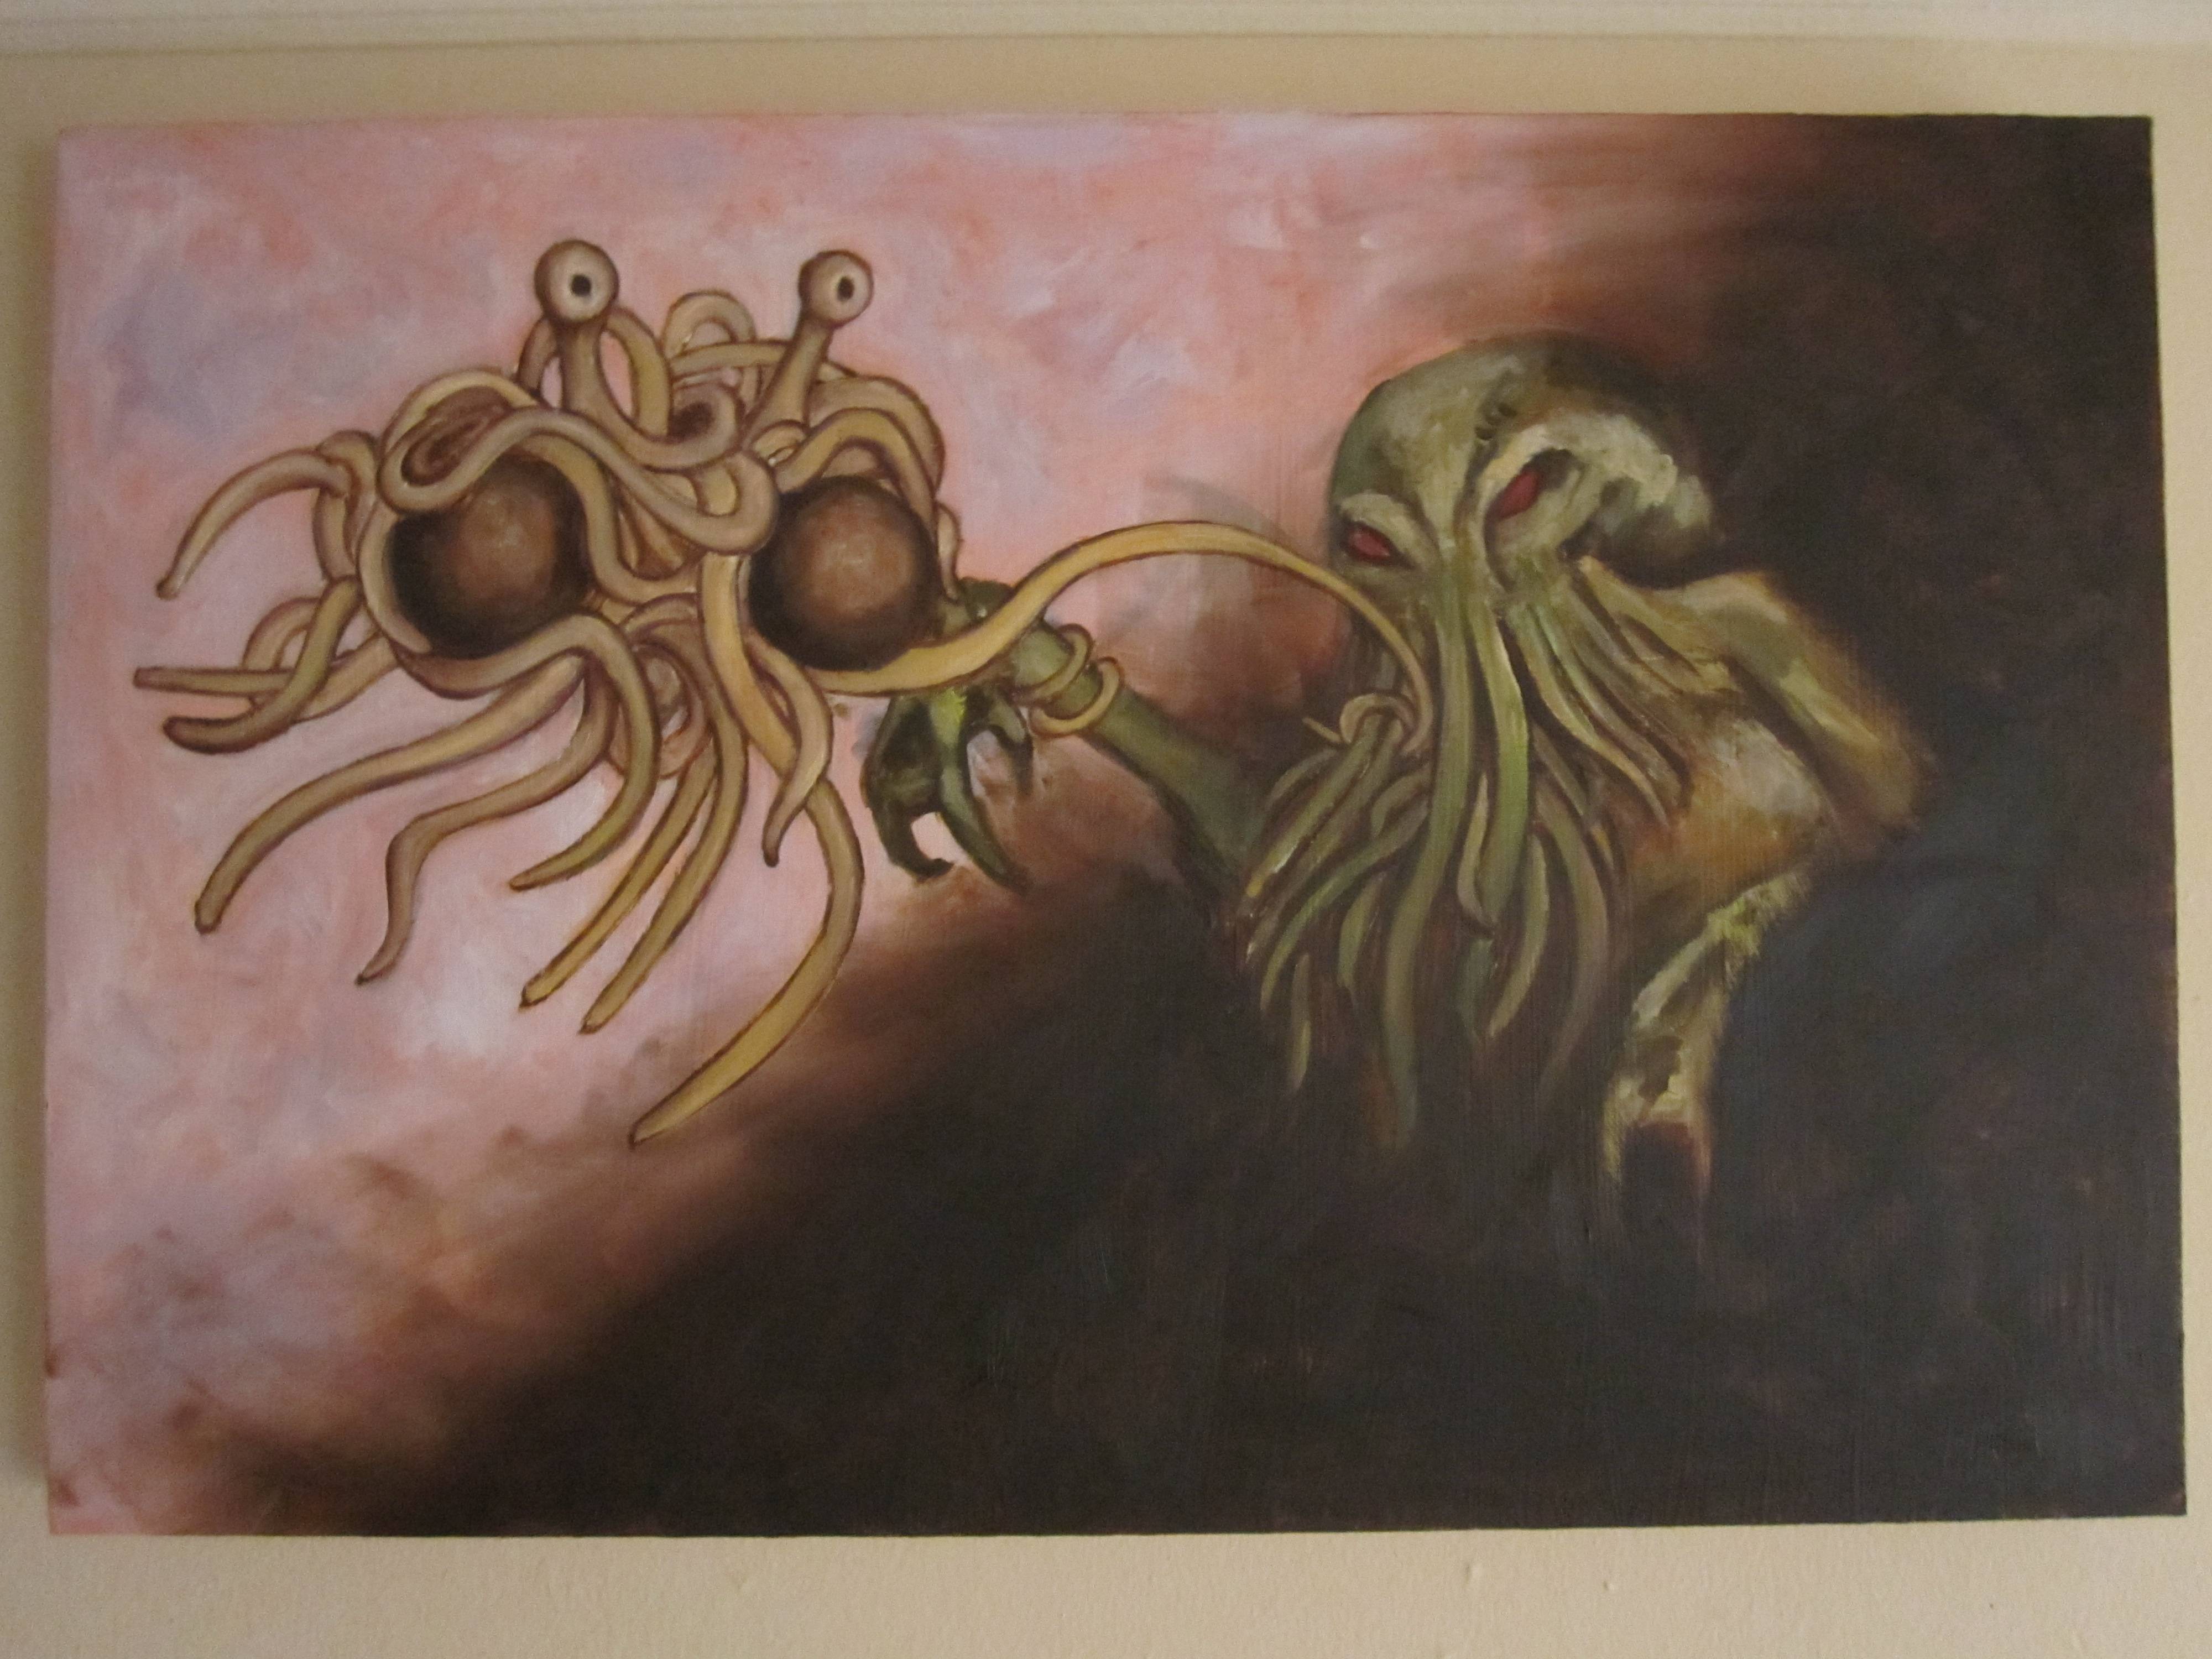 I asked my friend to paint me an image of FSM engaging Cthulhu